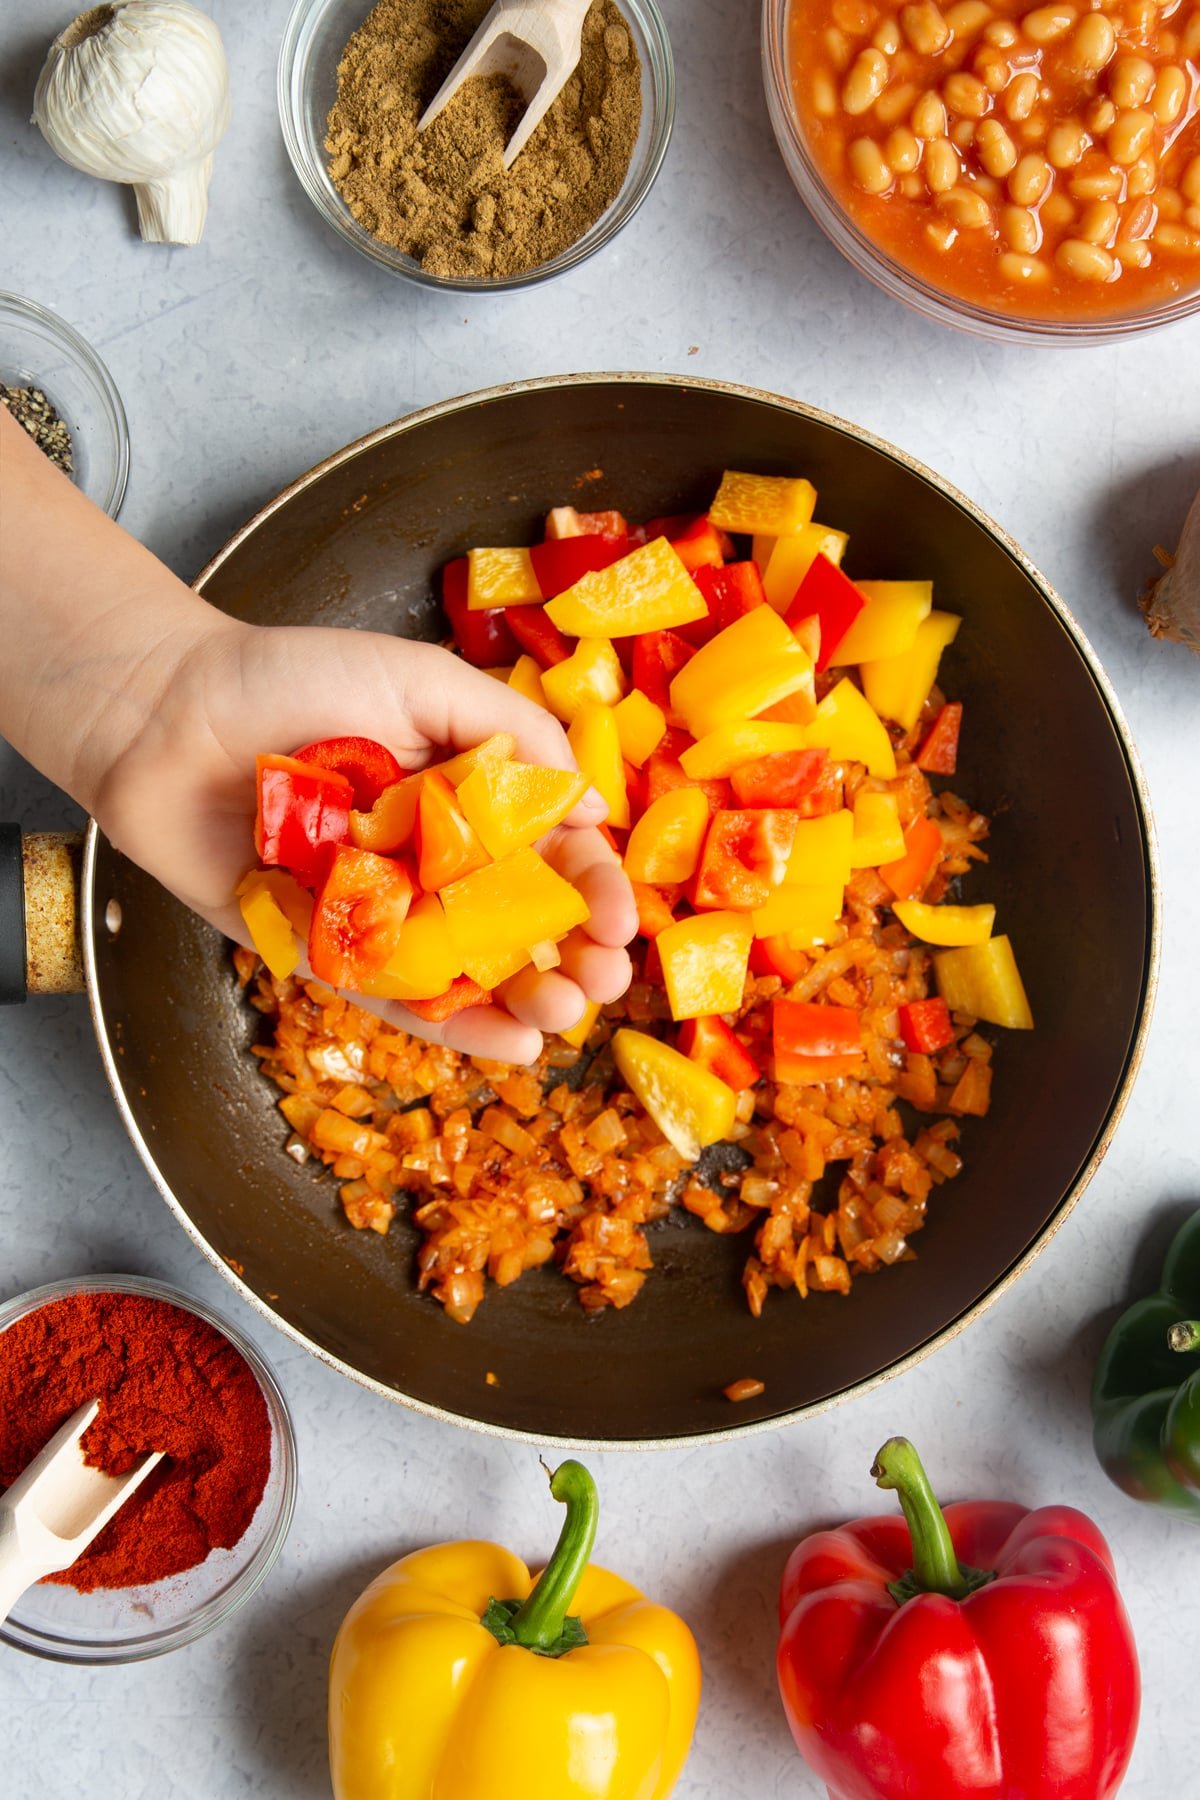 A frying pan containing fried onion, garlic, paprika, cumin and pepper. A hand is adding fresh chopped peppers. Ingredients to make baked bean chilli surround the pan.